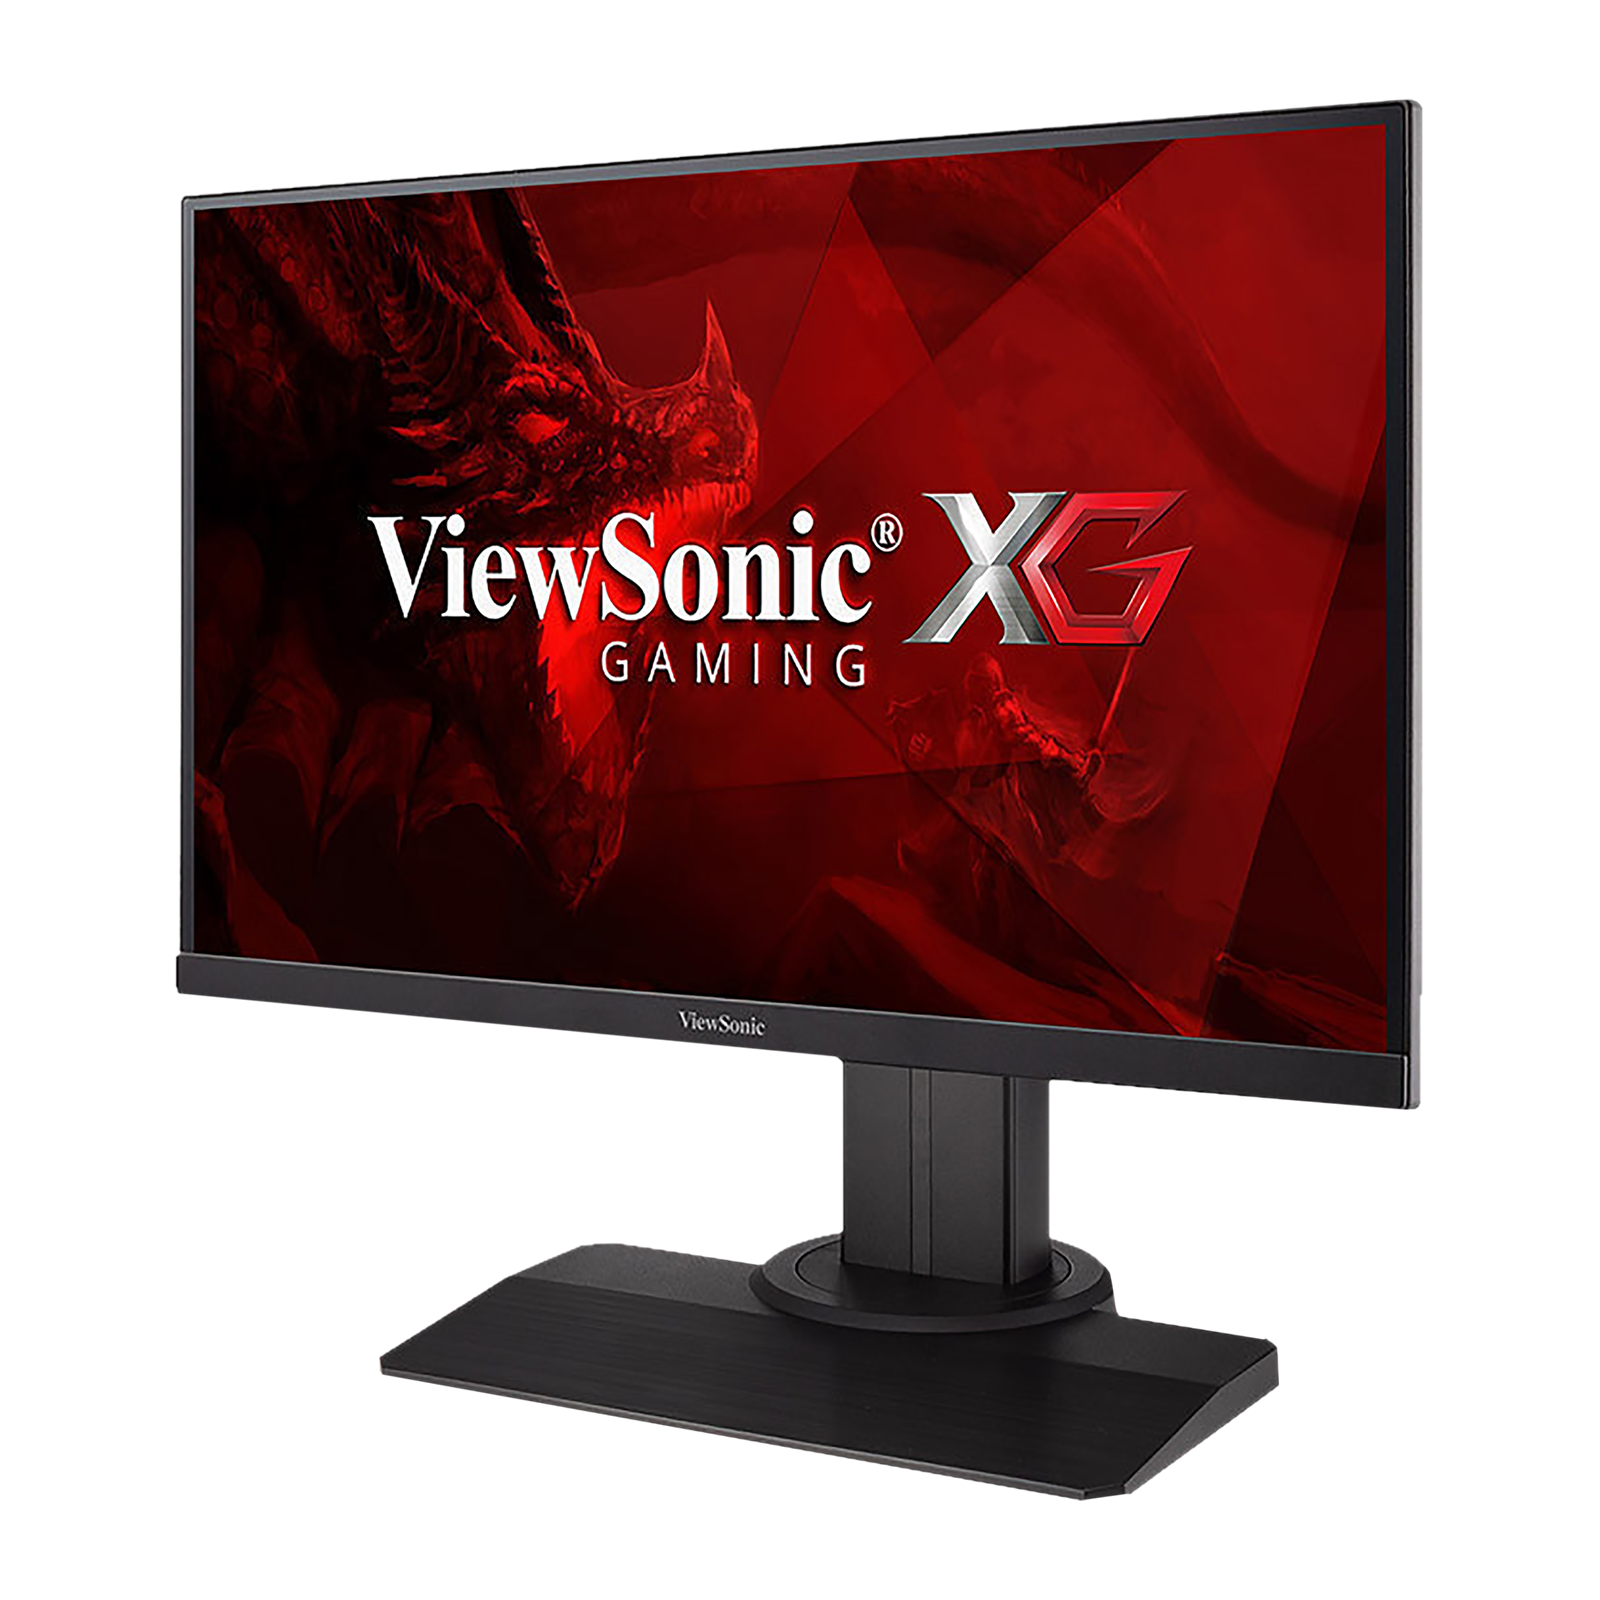 ViewSonic XG 60.96 cm (24 inch) Full HD IPS Panel LED 3-Side Borderless Height Adjustable Gaming Monitor with Flicker-Free Technology_1